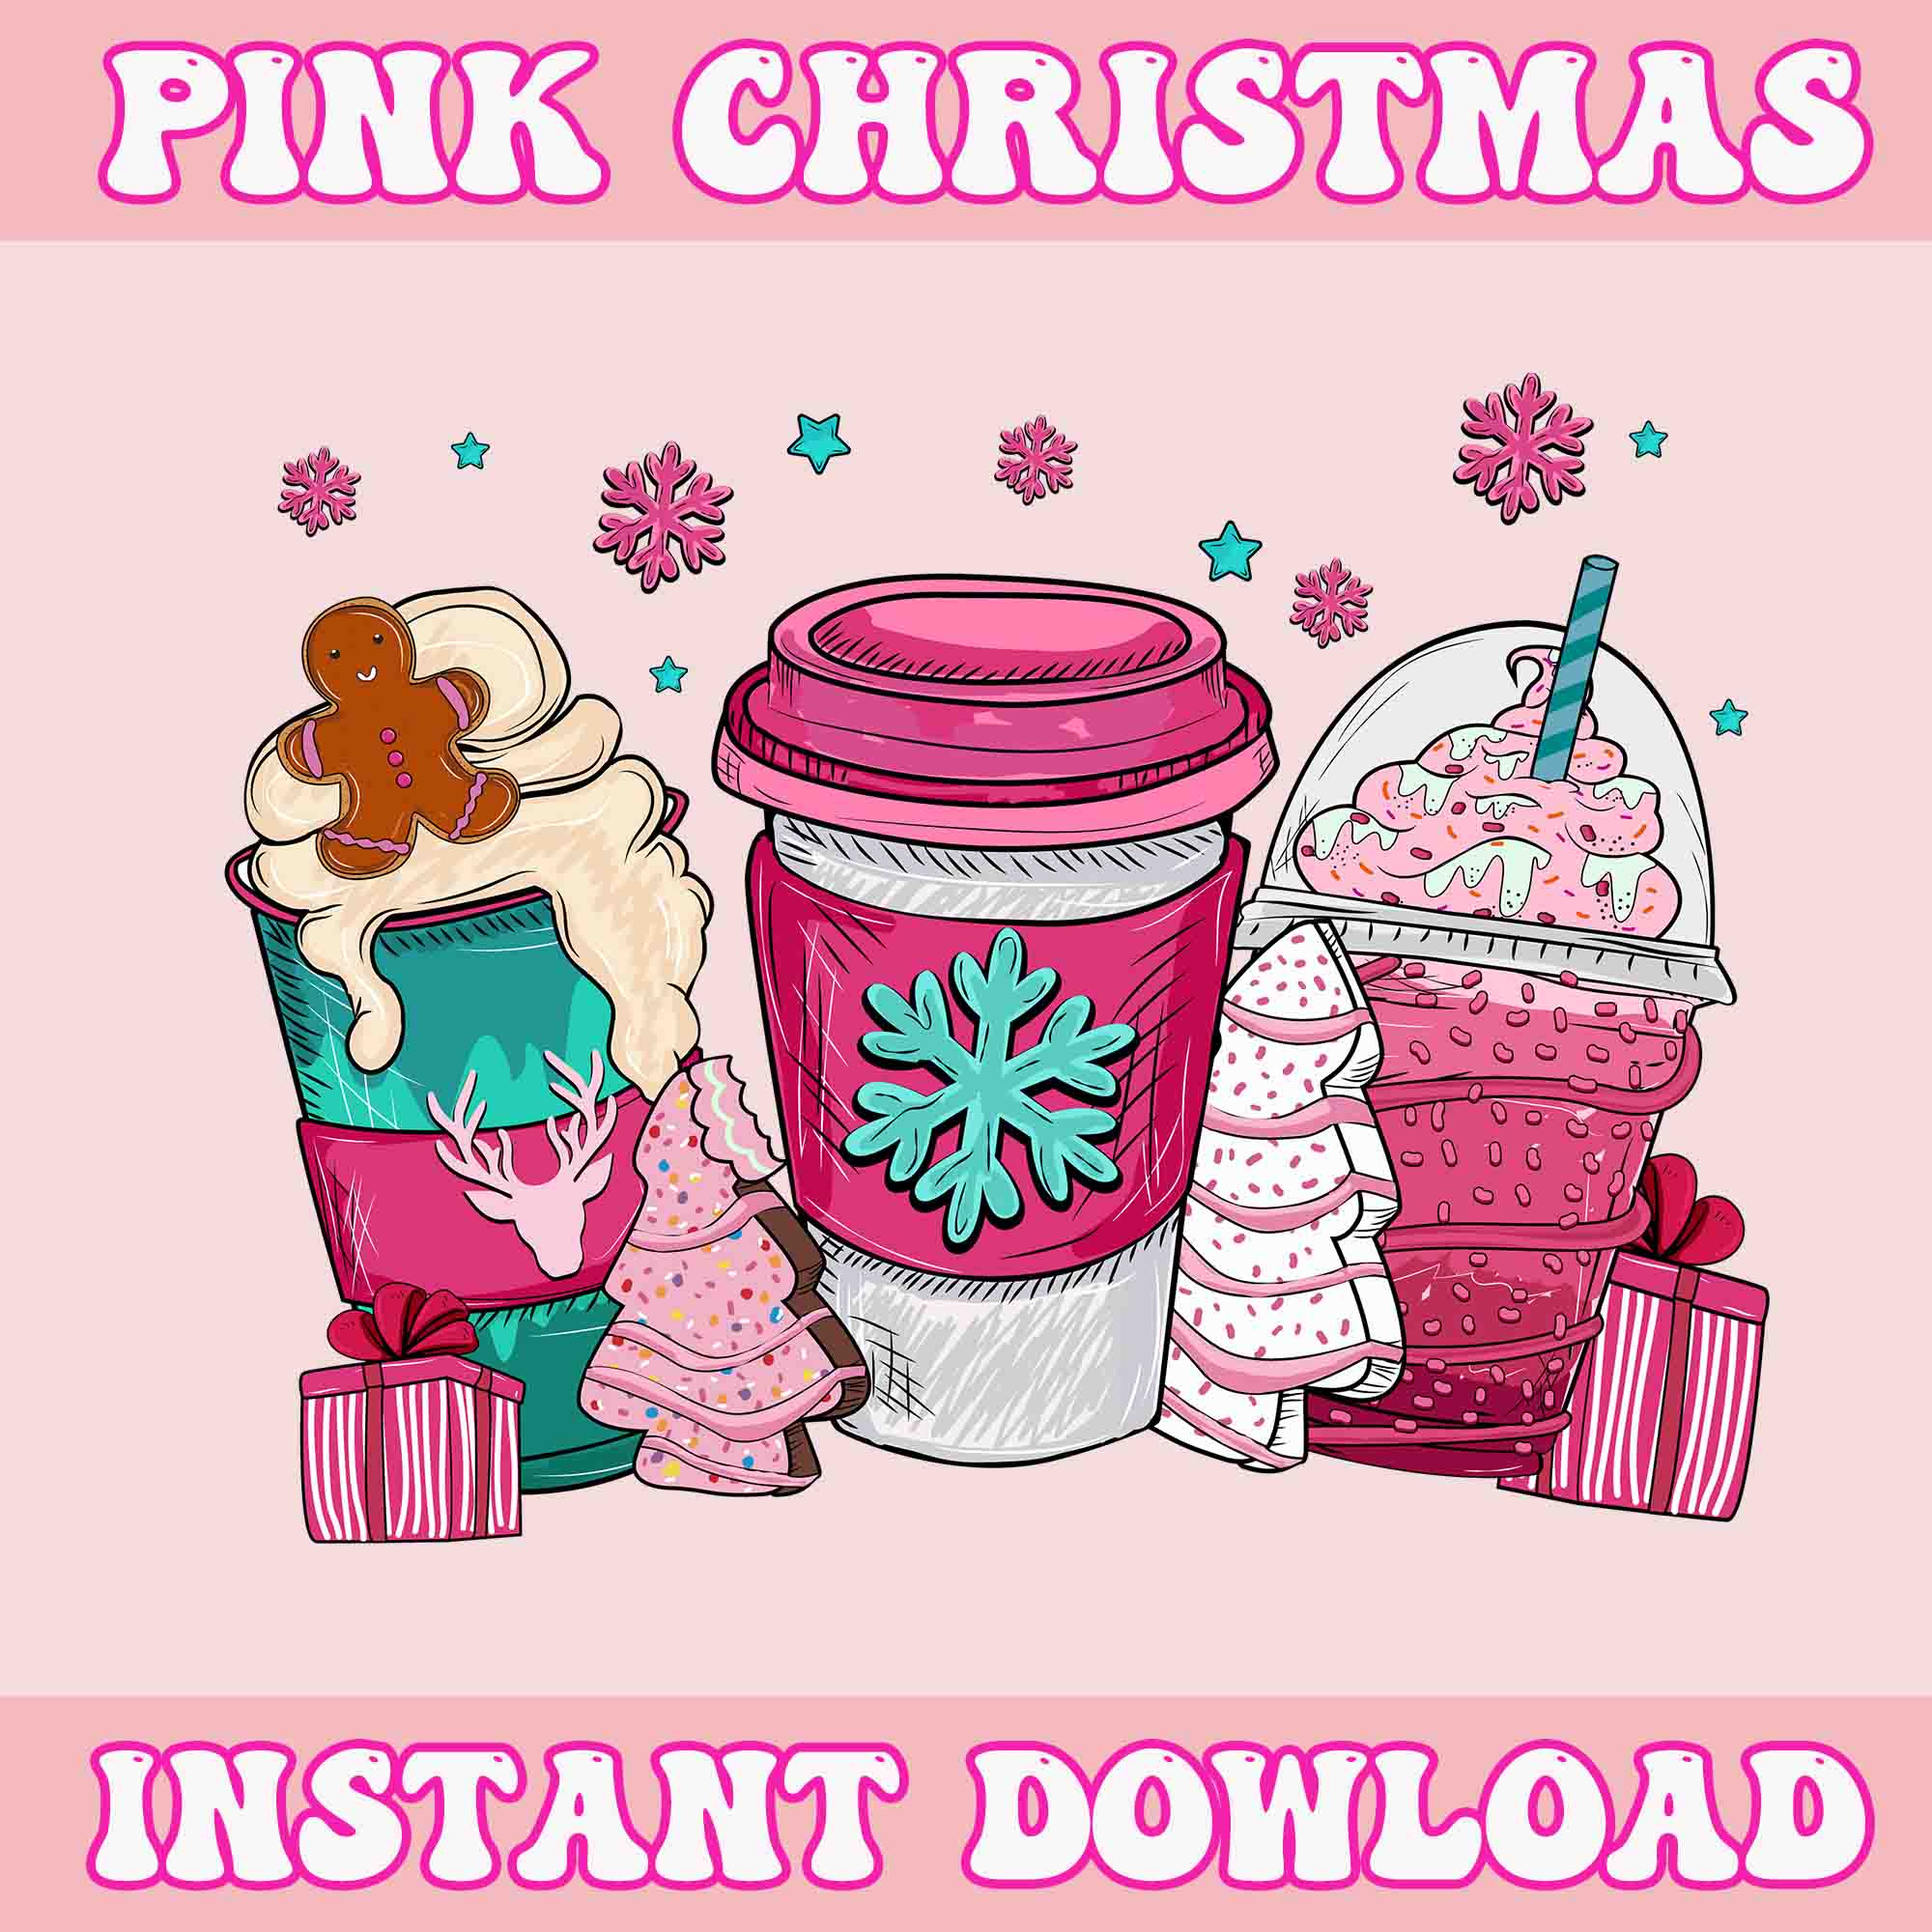 Pink Christmas Coffee Cups Cake Svg, Pink Christmas Svg, Pink Winter Svg, Pink Santa Svg, Pink Santa Claus Svg, Christmas Svg